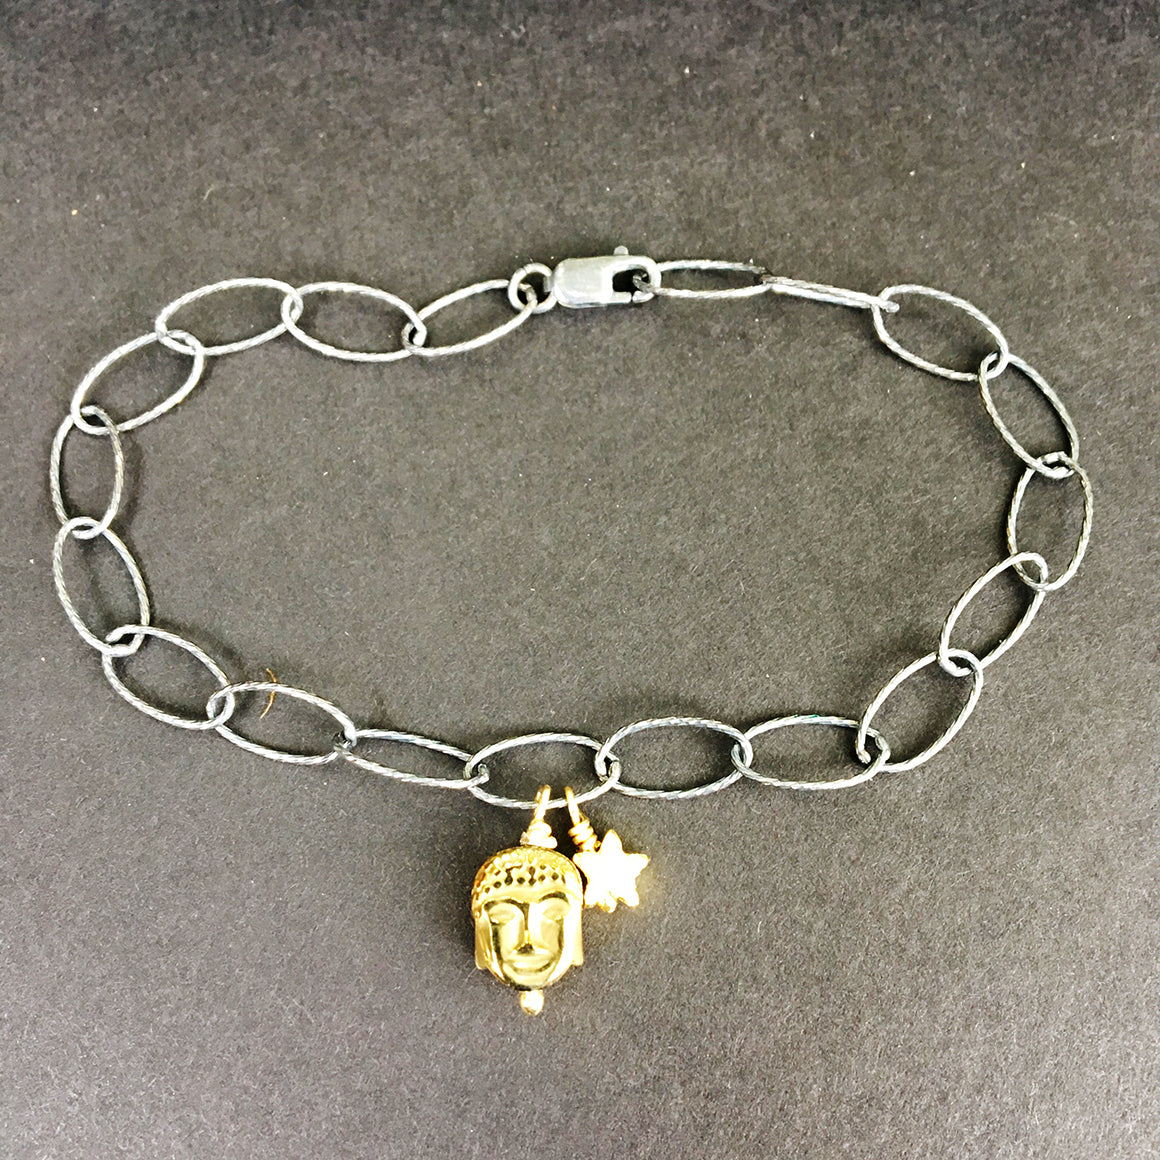 Loose Link Chain Bracelet with Gold Buddha and Star